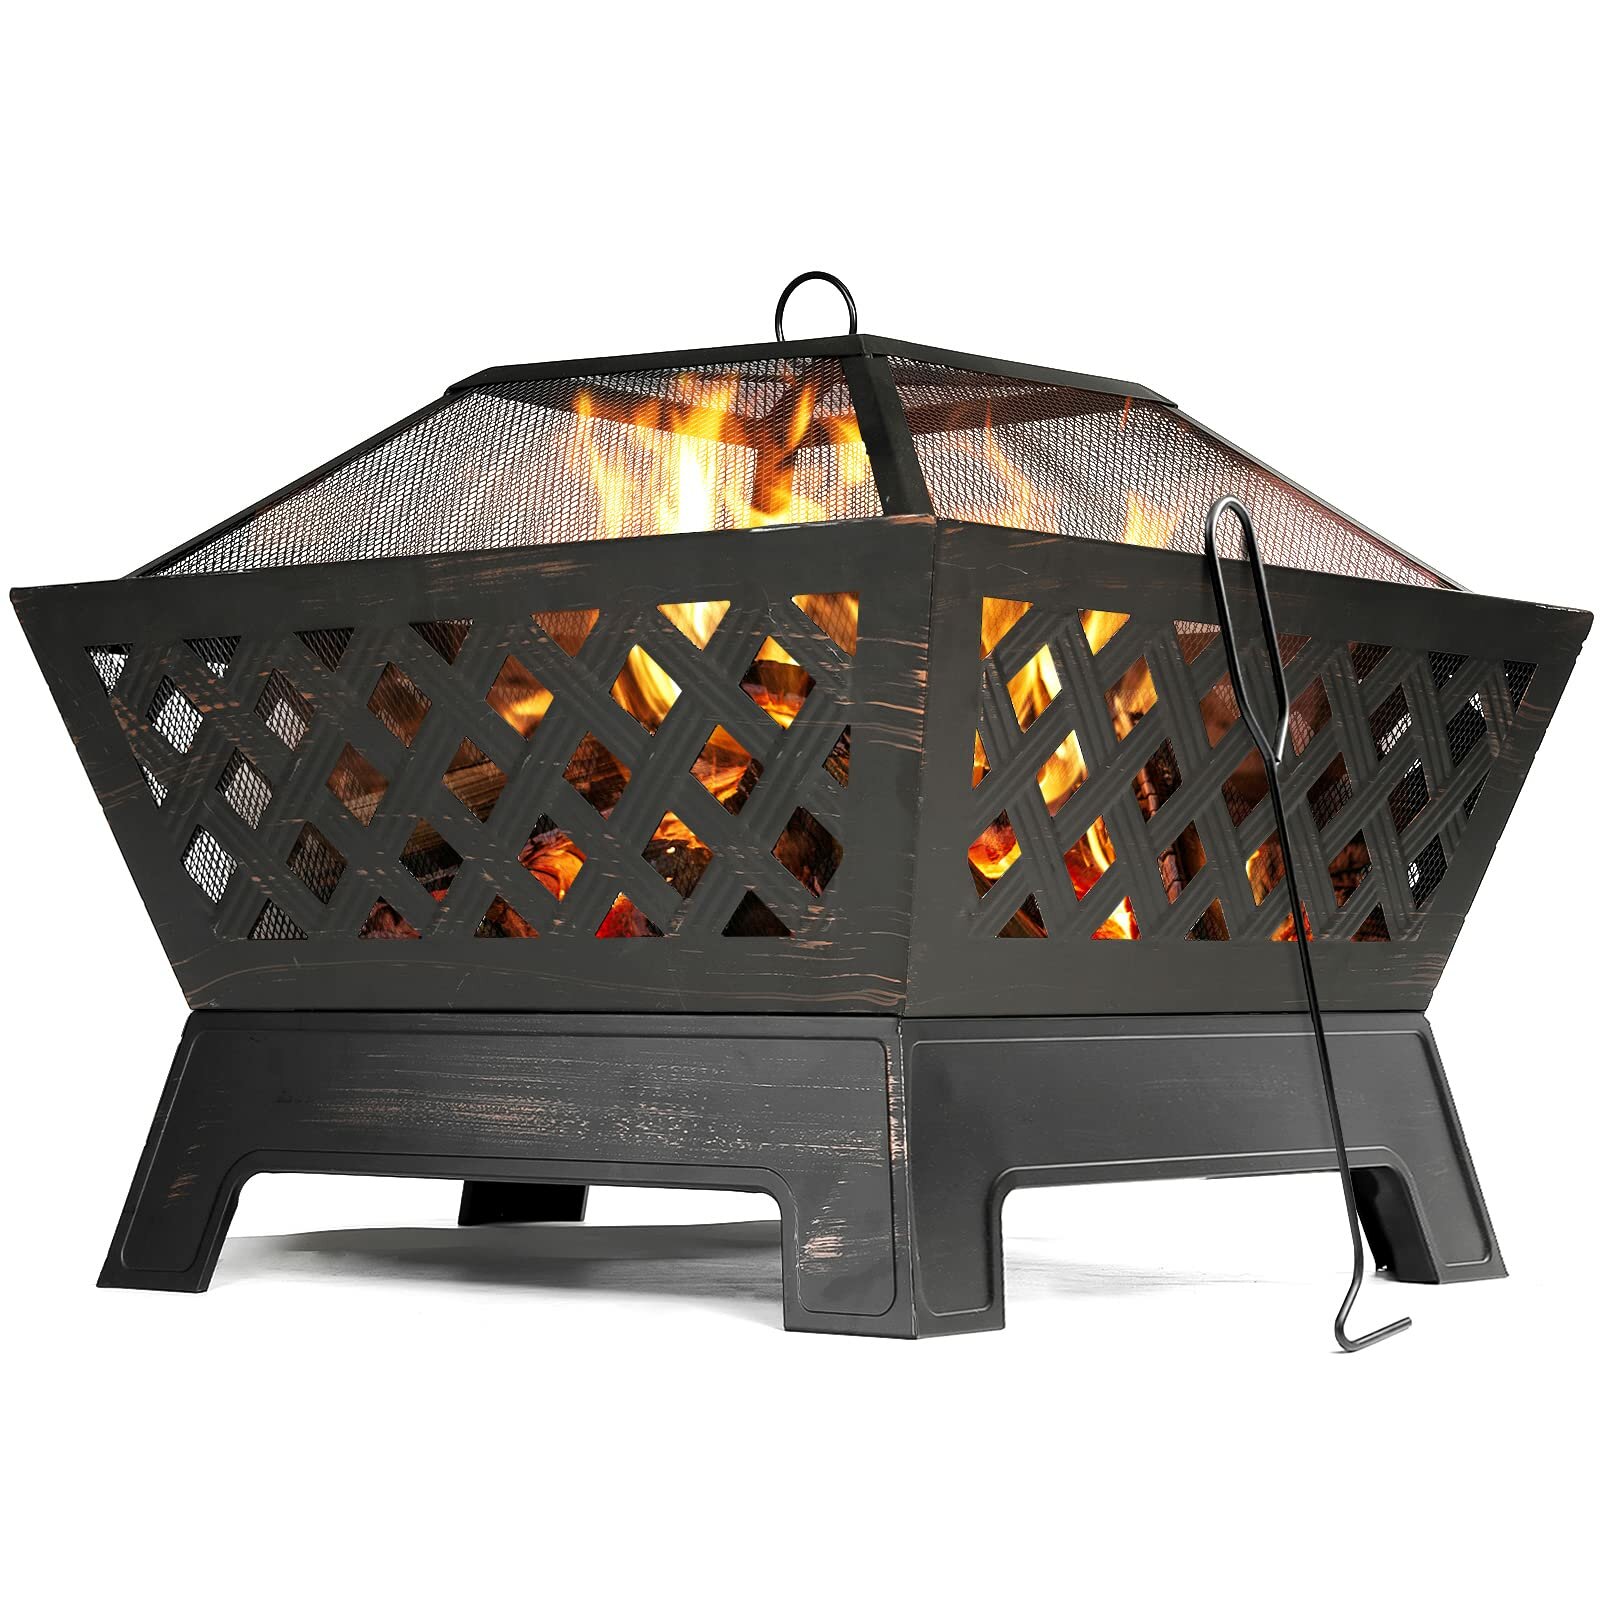 

SINGLYFIRE 26 Inch Fire Pit for Outside Square Firepit Outdoor Wood Burning Extra Large Steel Firepit Rectangular Deep B